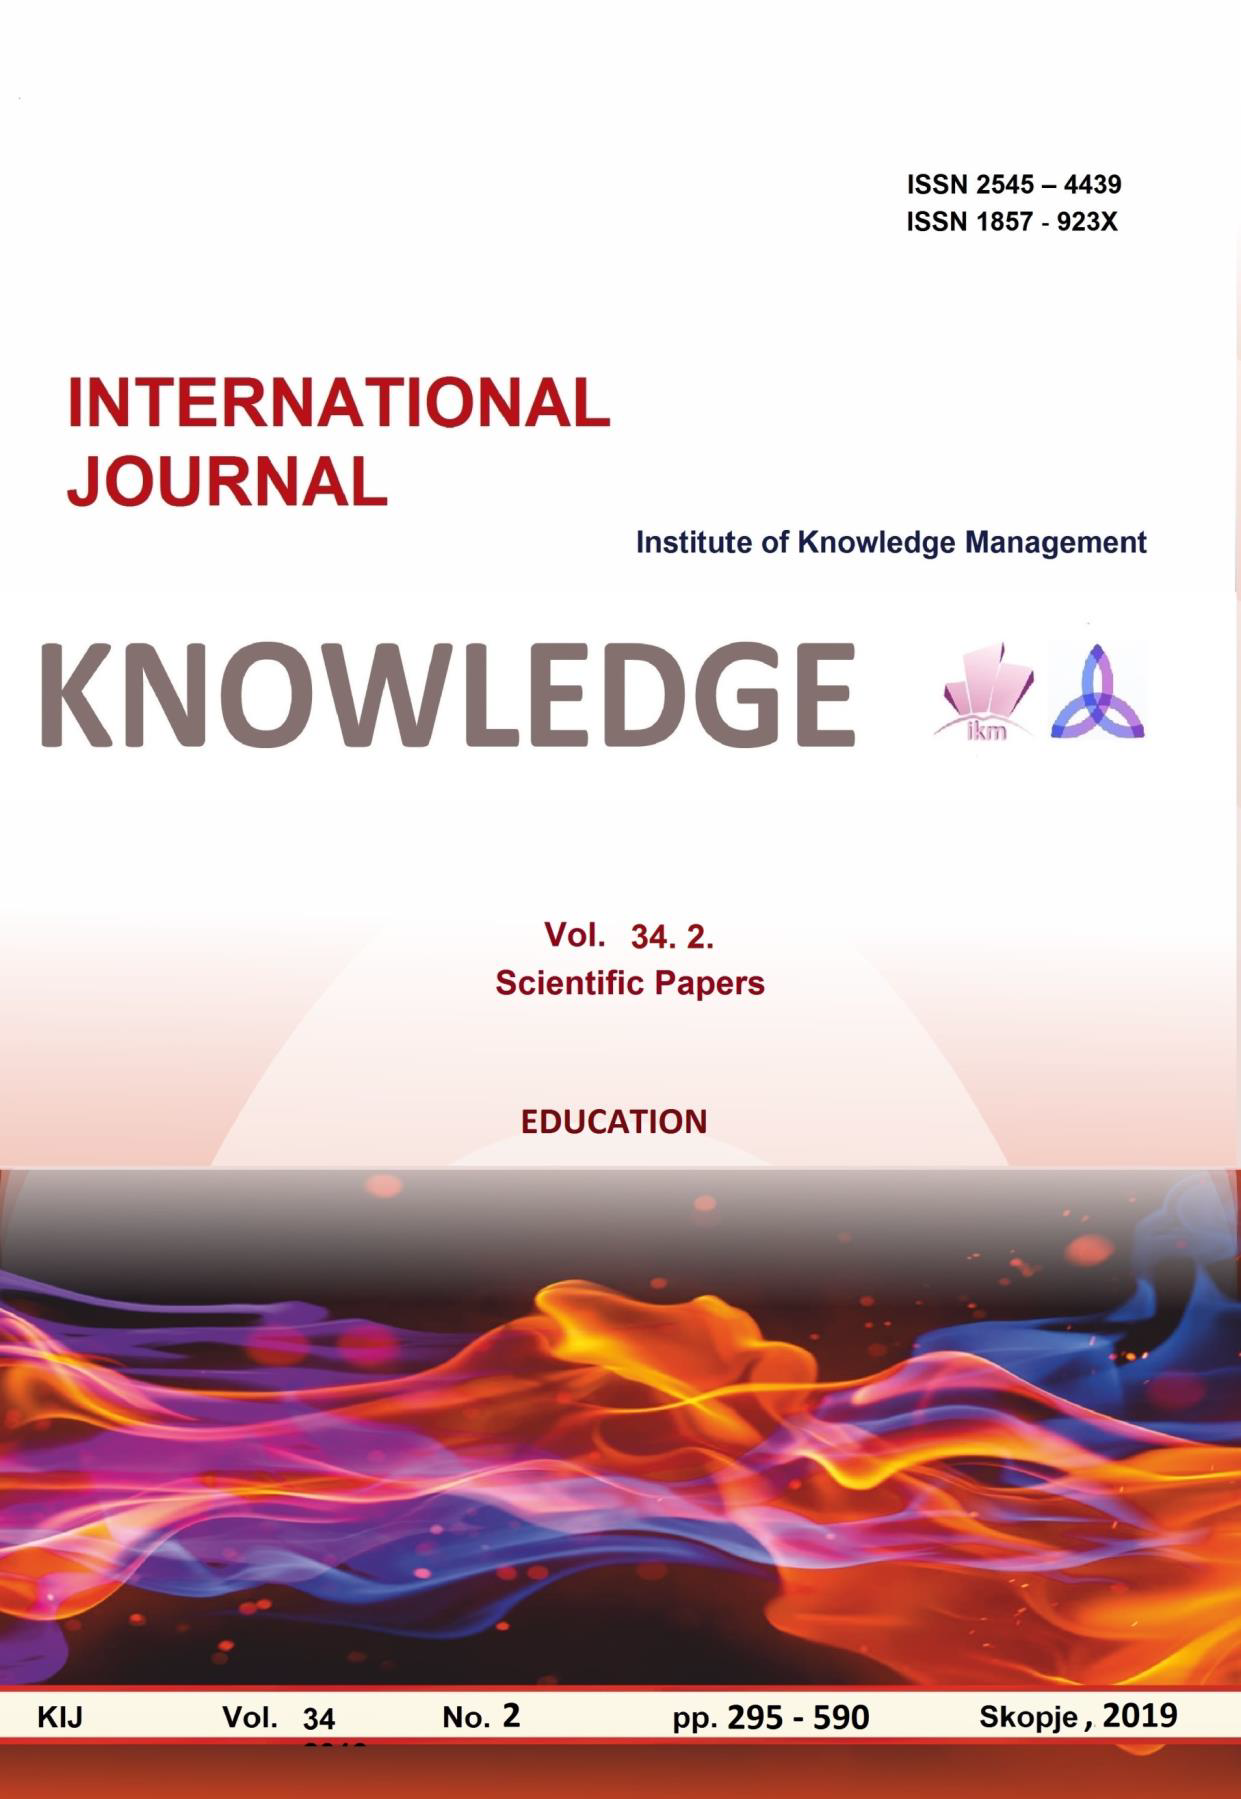 					View Vol. 34 No. 2 (2019): Knowledge without borders
				